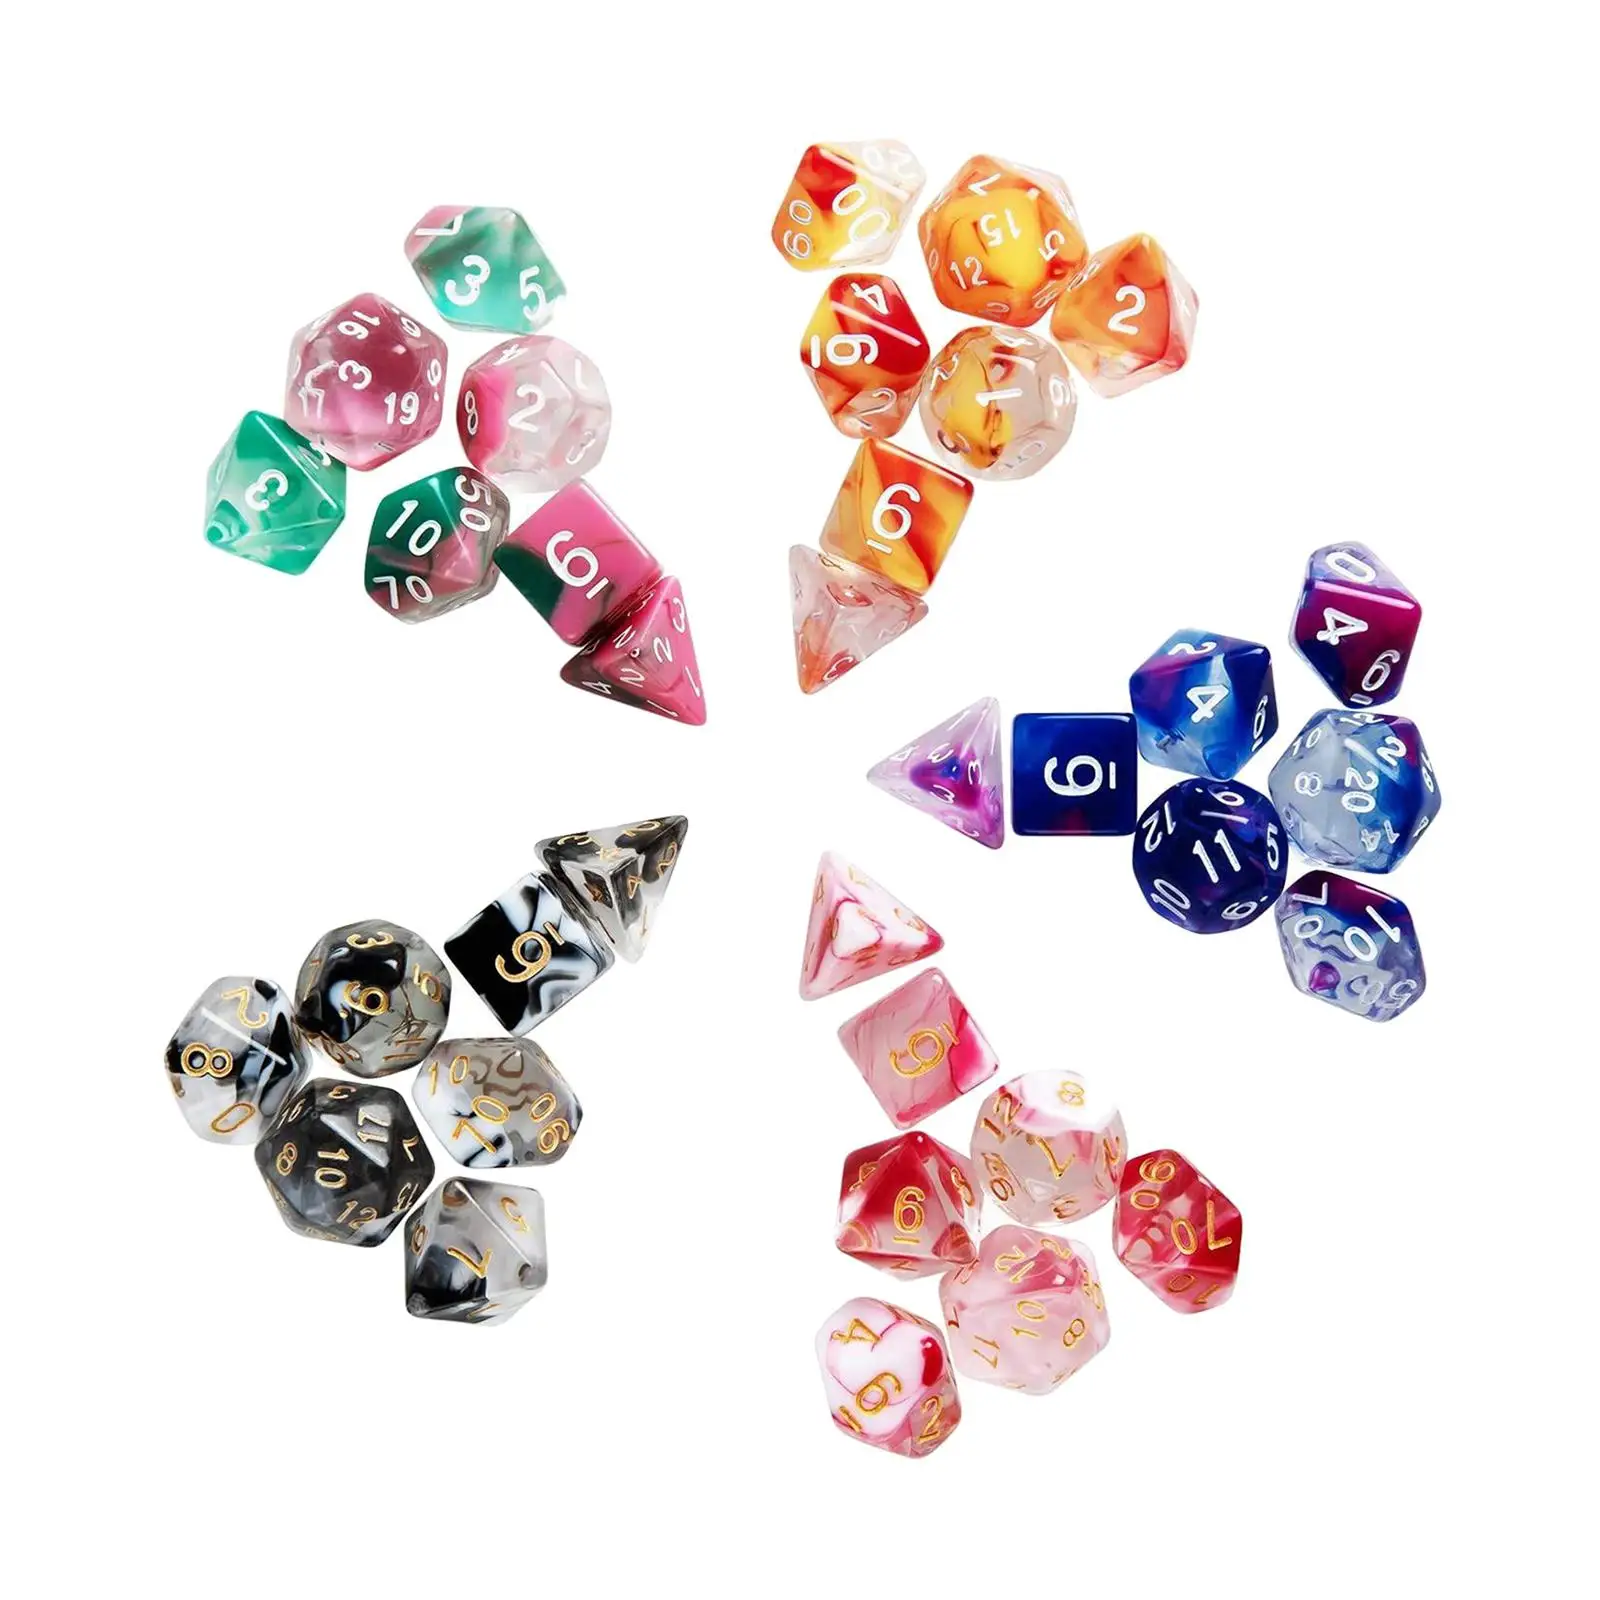 35x Acrylic Polyhedral Dices Set Party Toys,D4-D20 Entertainment Toys for RPG Card Games